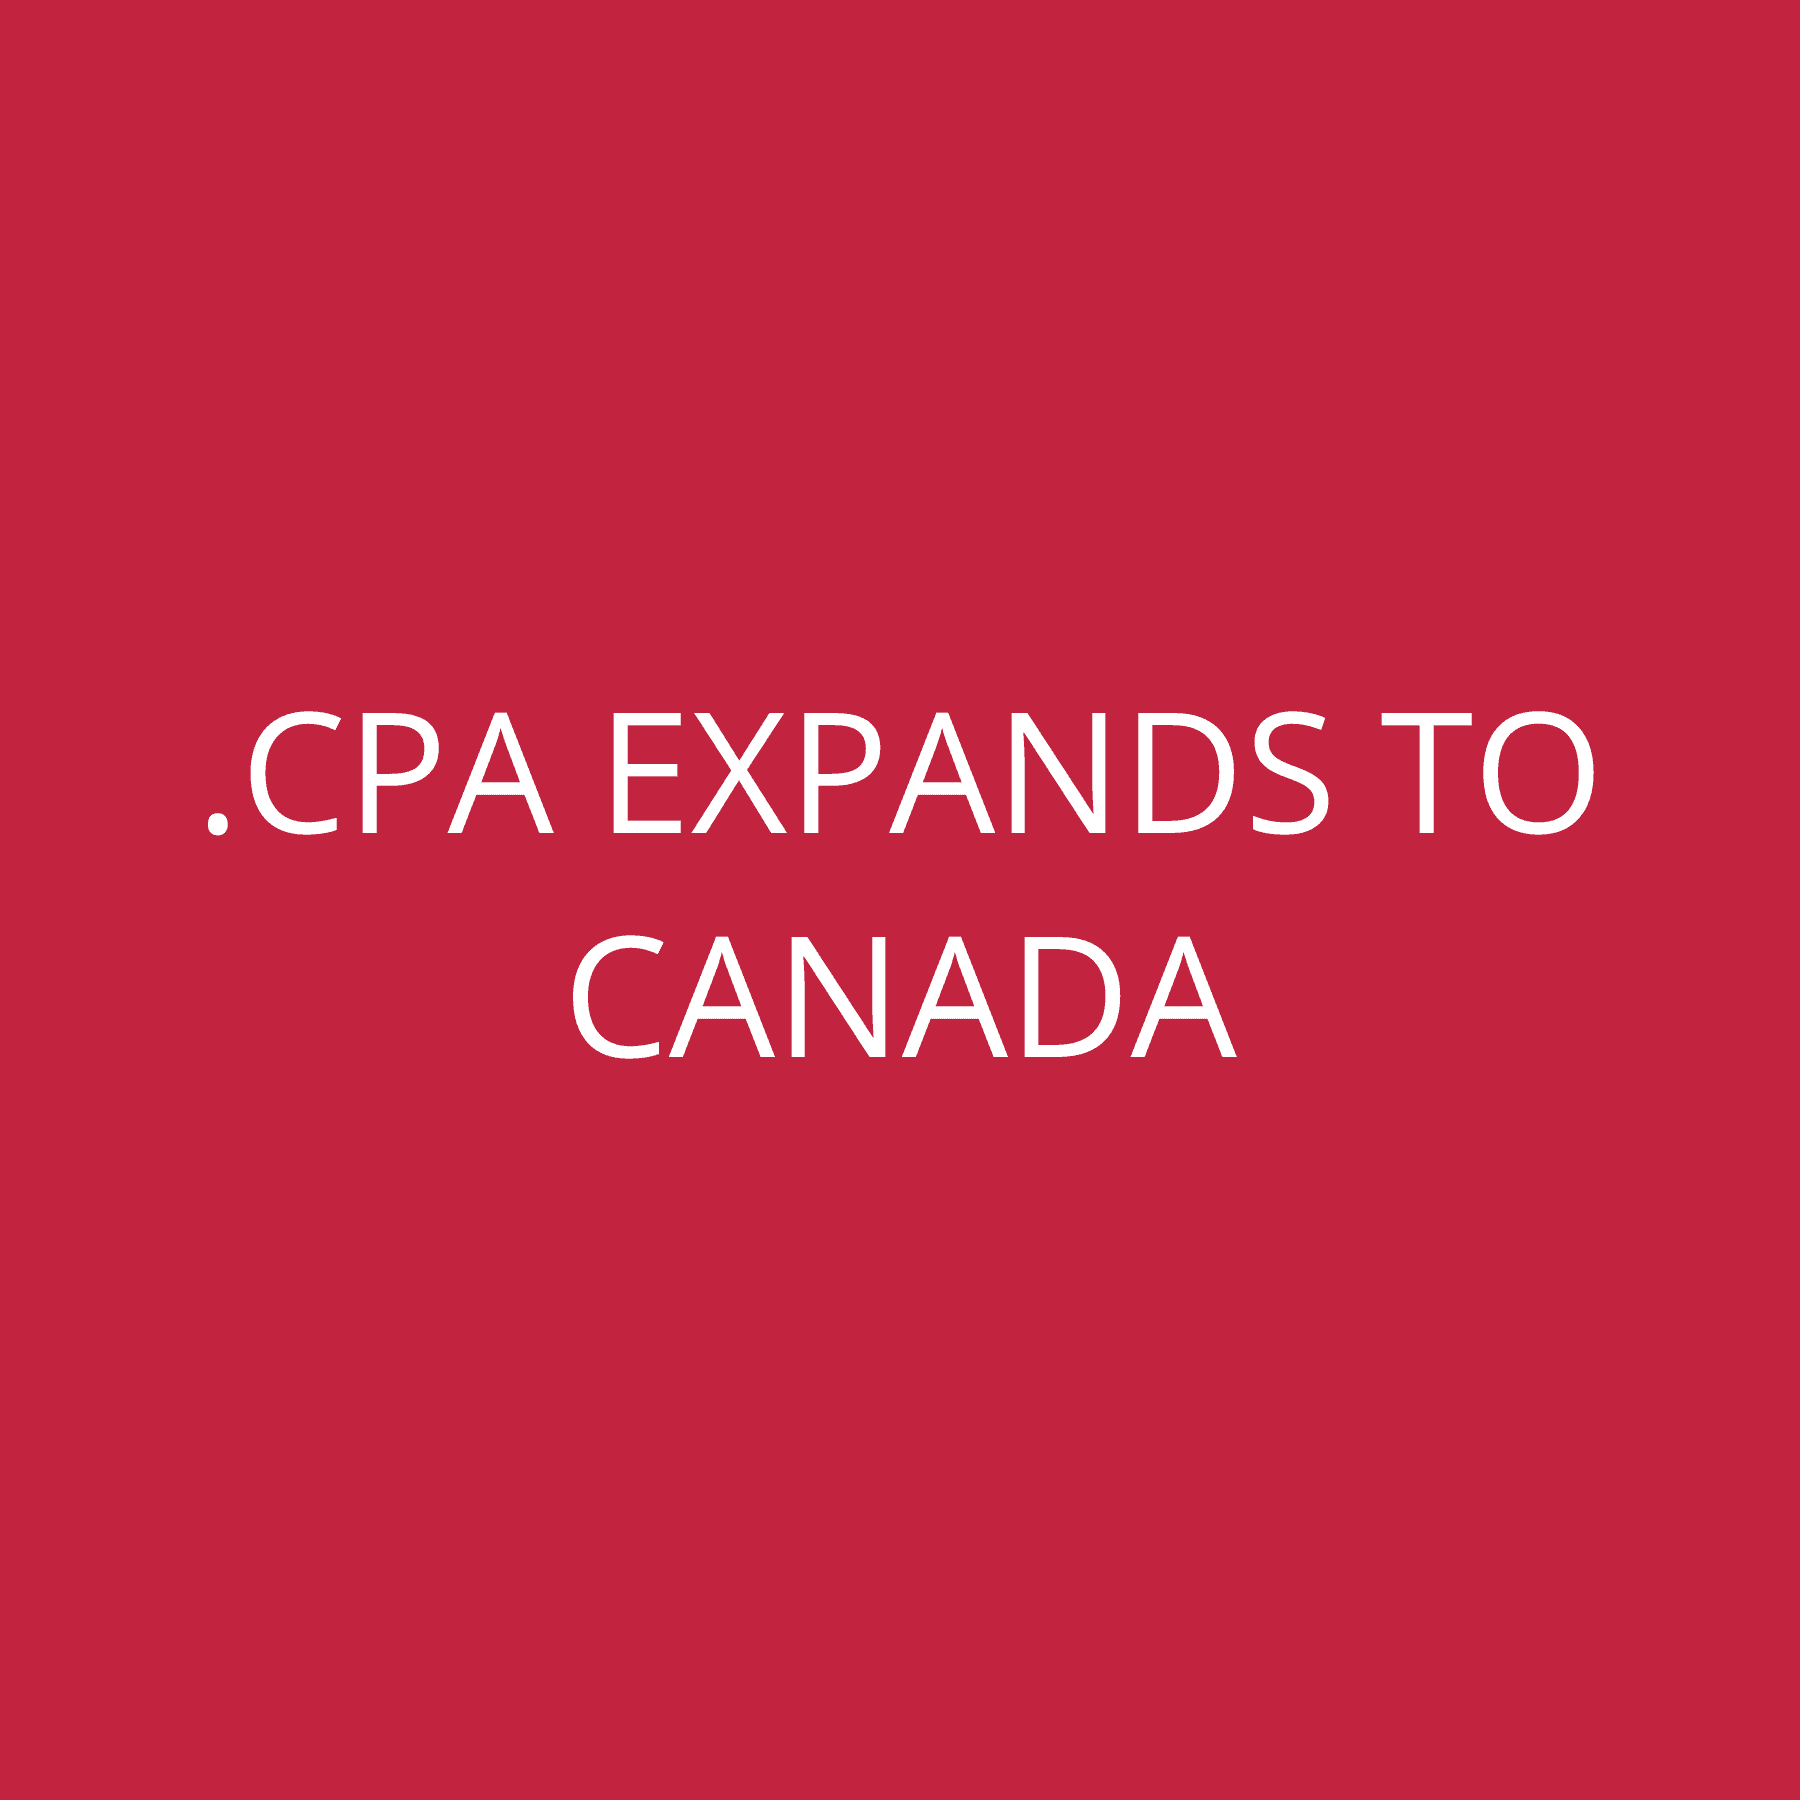 .CPA expands to Canada